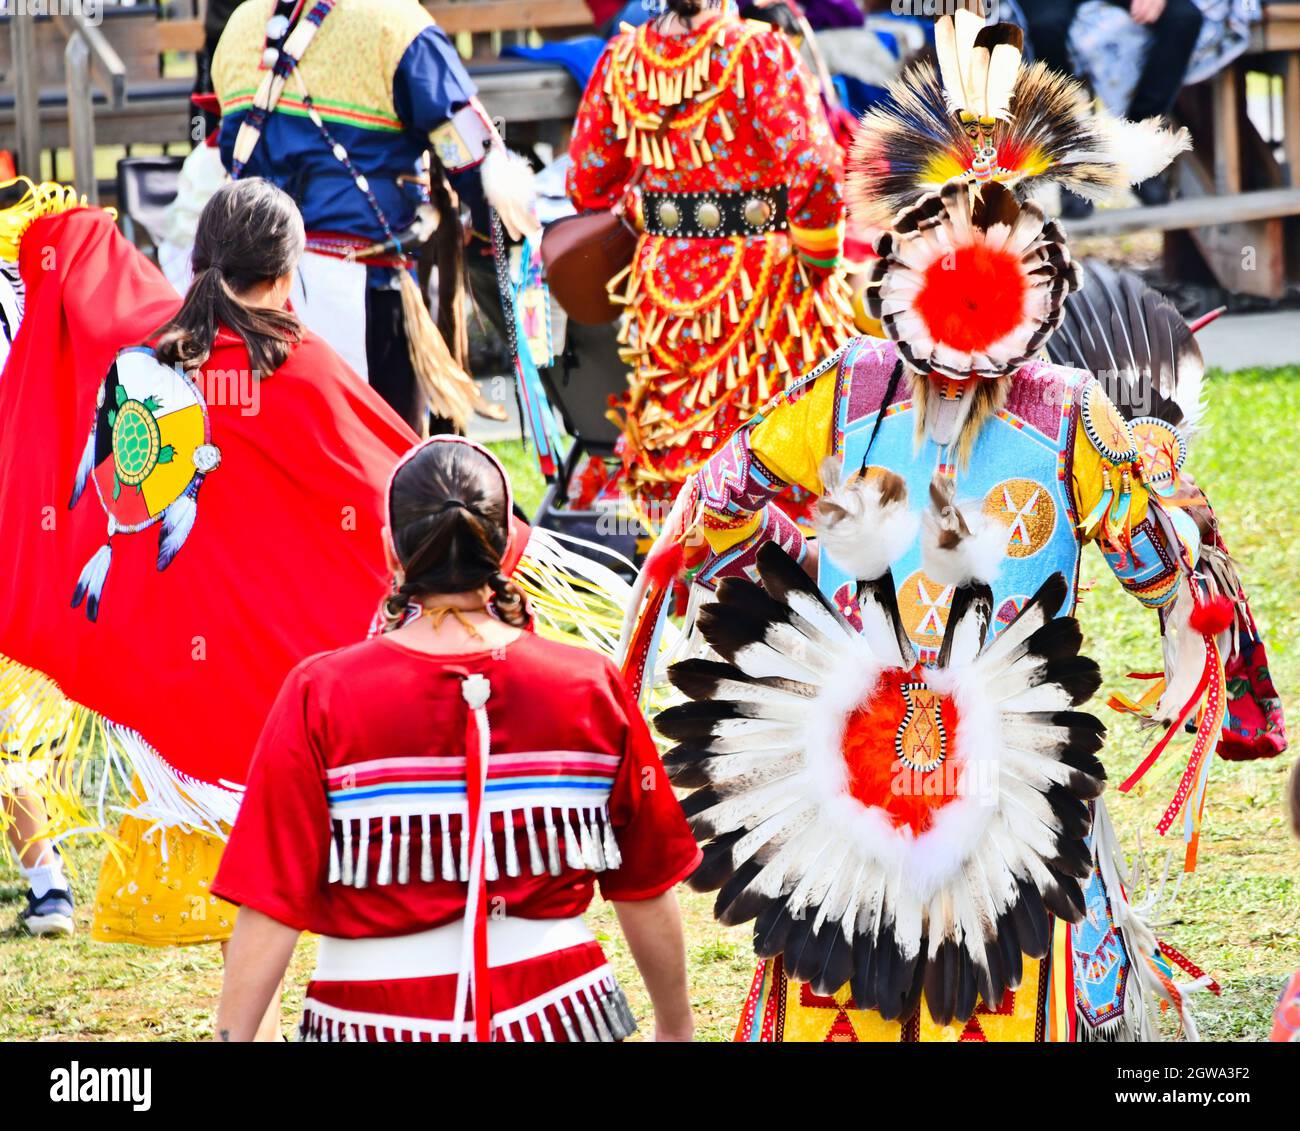 First Nation people dancing at the Fort William First Nation Pow Wow for 'celebration and healing' in Thunder Bay, Ontario, Canada in 2021, Stock Photo